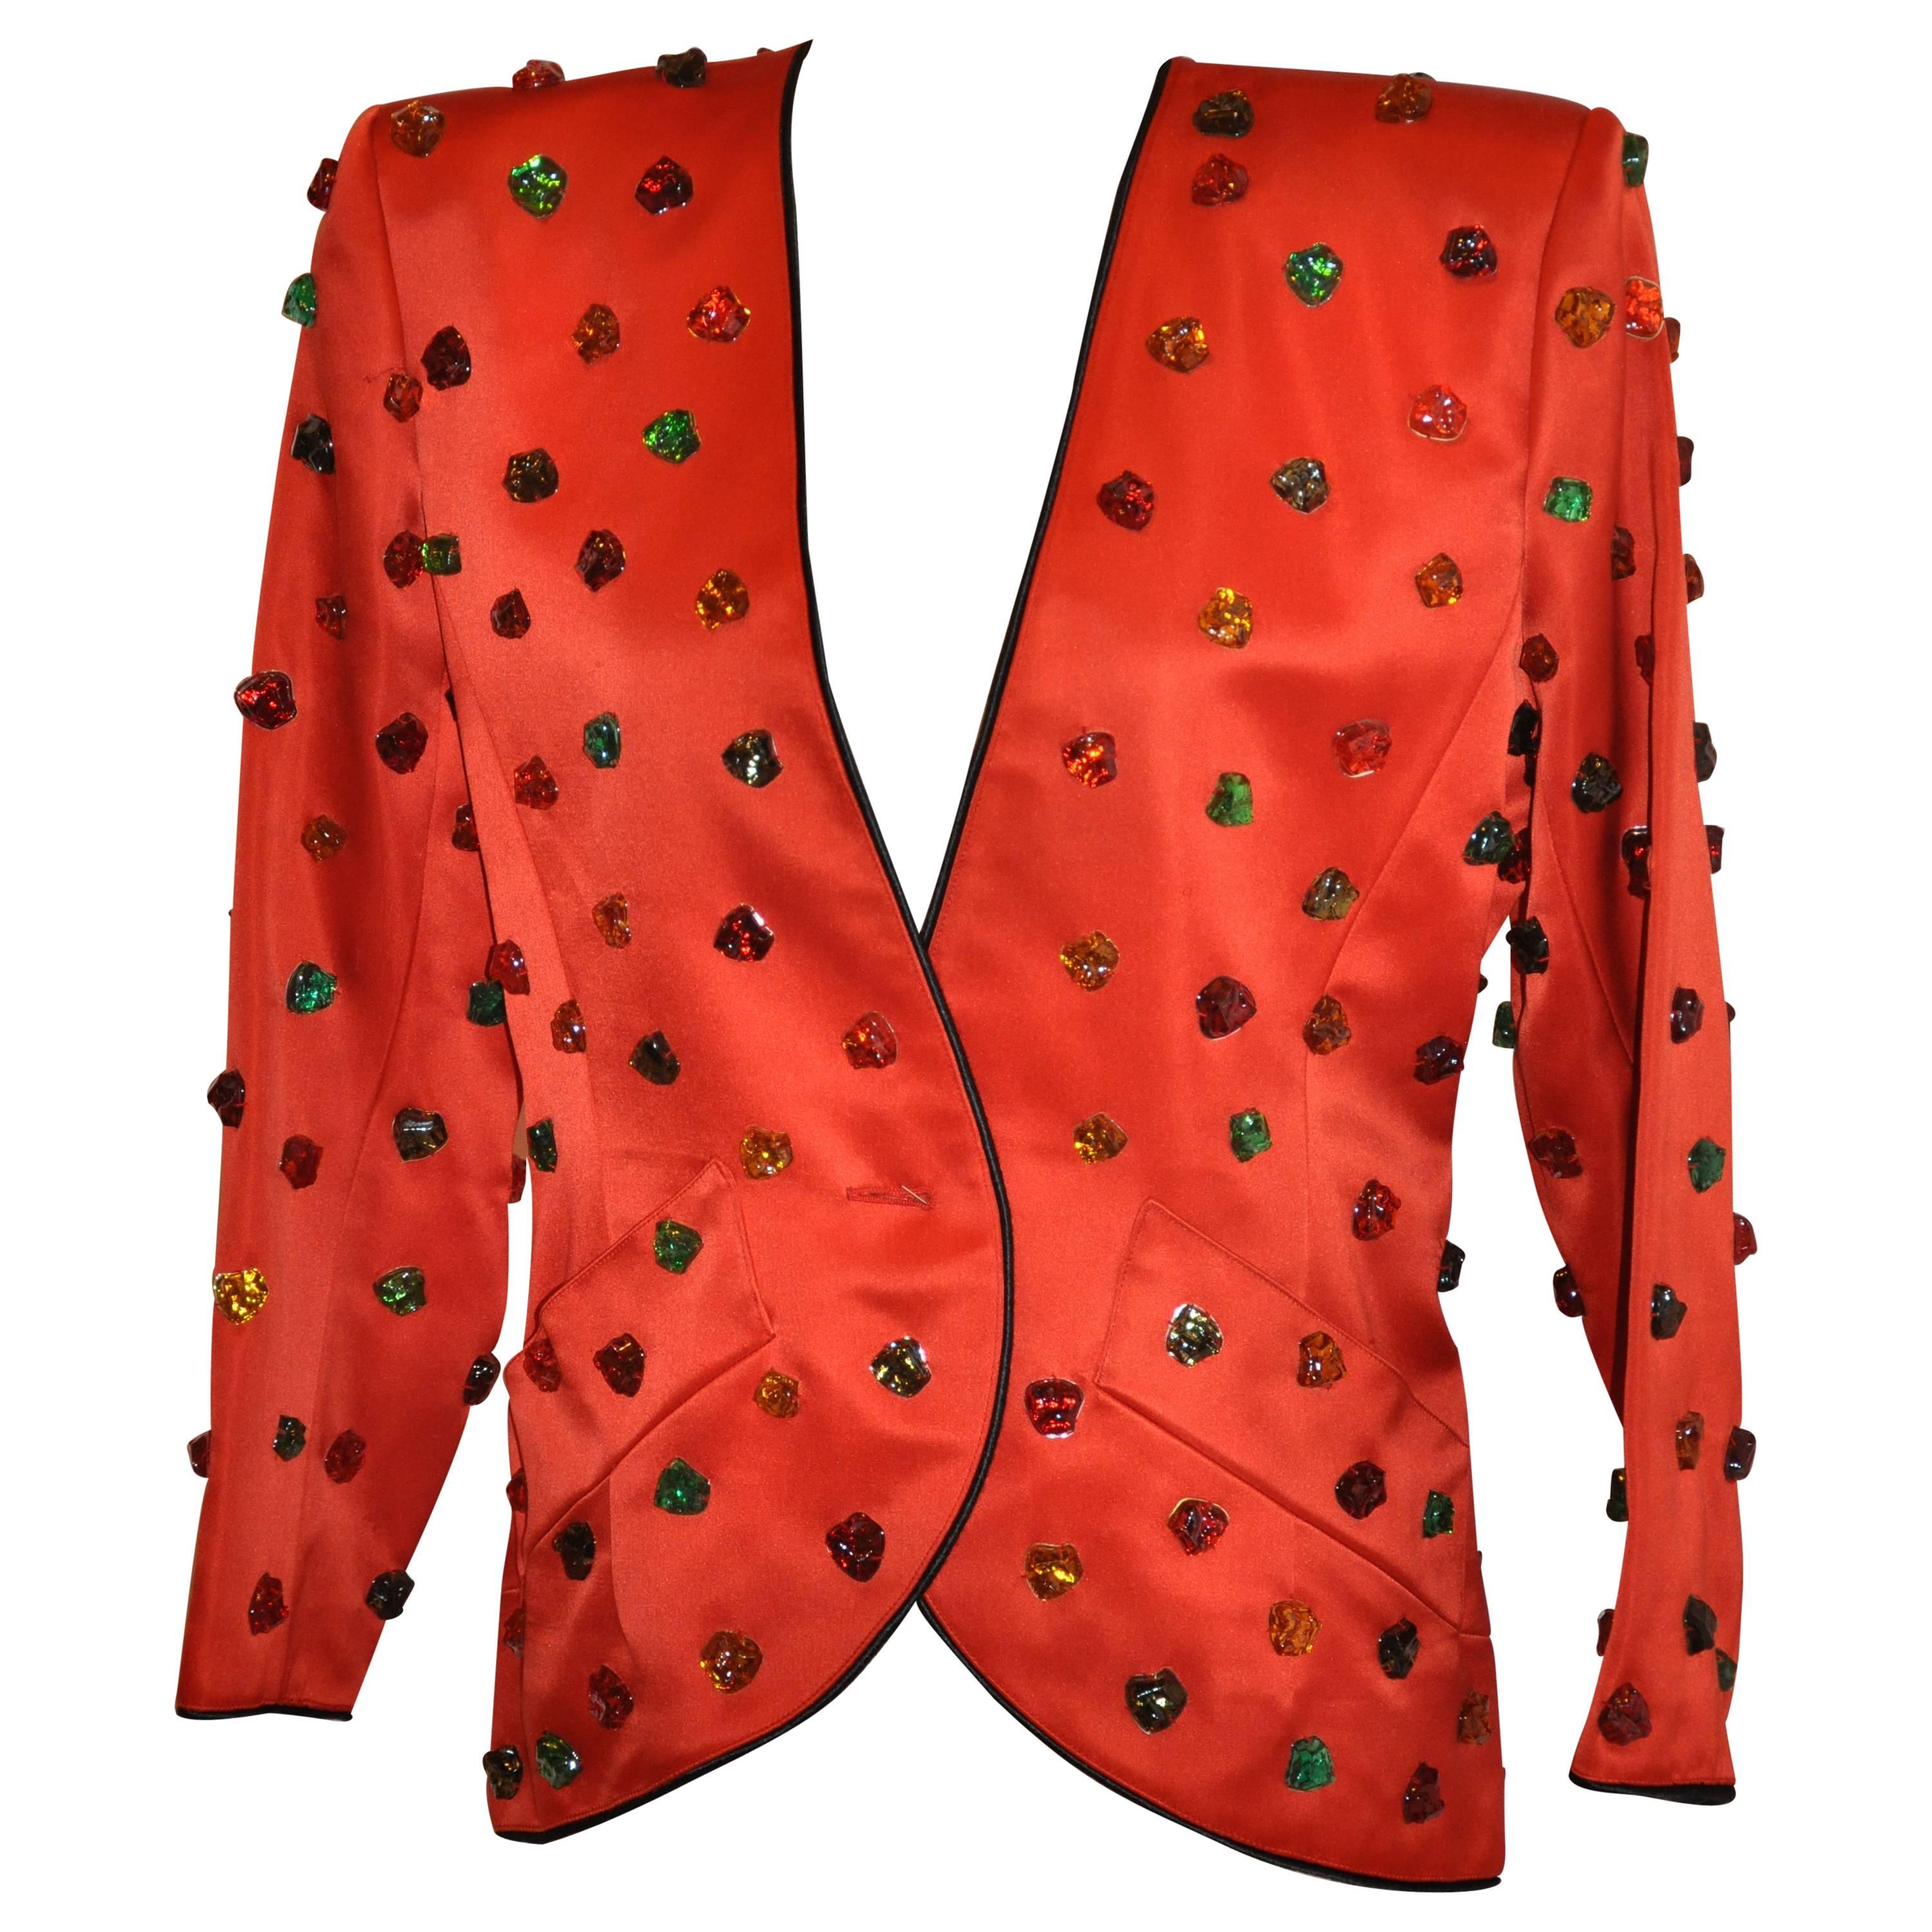 Rare Yves Saint Laurent Embellished "Pour Glass" Stud Red Silk Cocktail Blazer For Sale